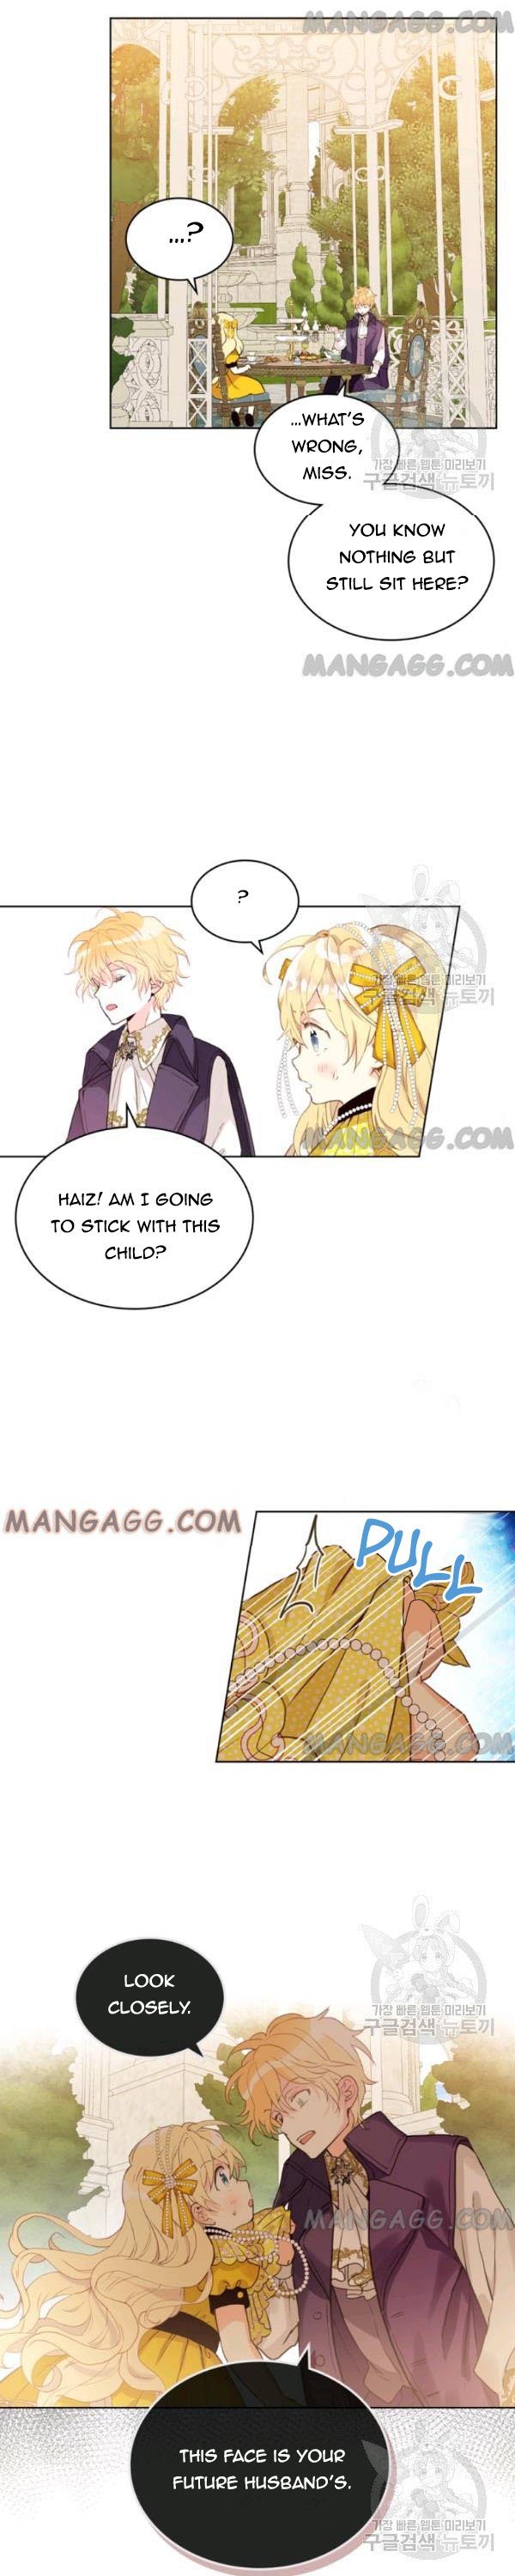 Am I The Daughter? - Page 3